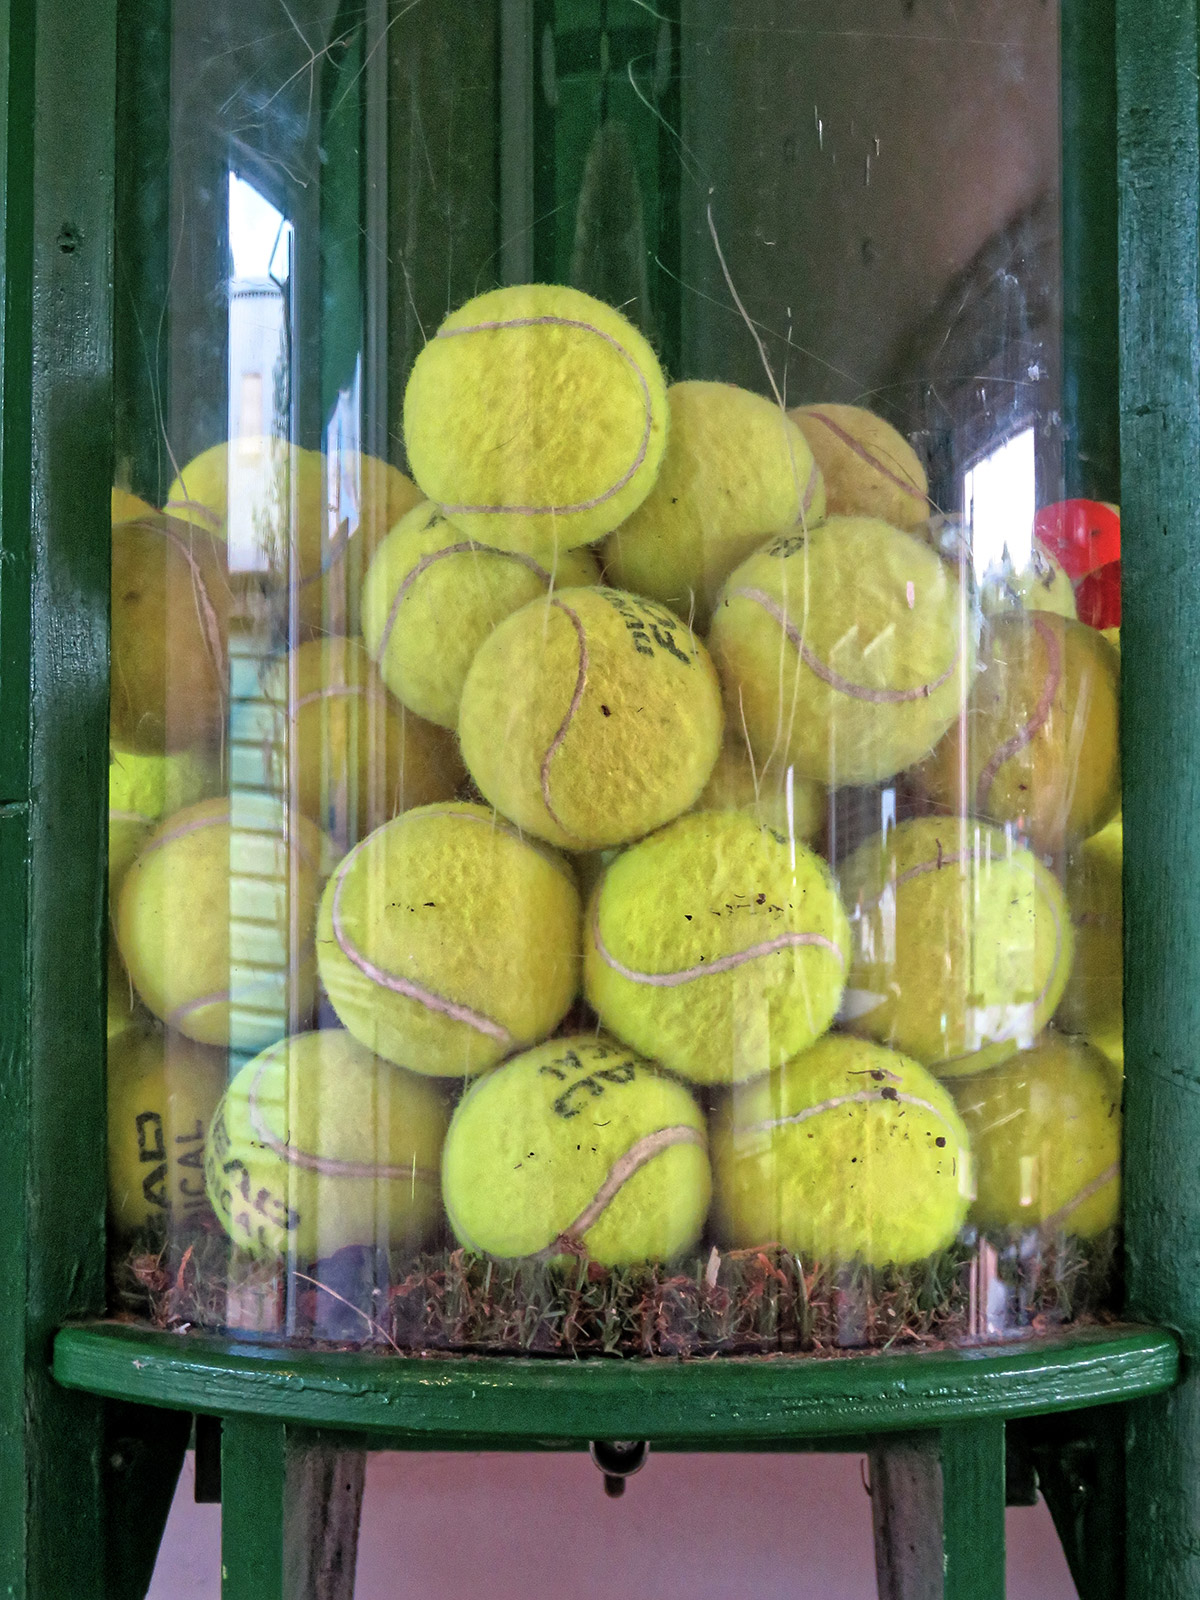 Display unit for lost and found tennis balls, for reuse at Highgate Cricket Club in August 2021, in Crouch End, Haringey, London, England.